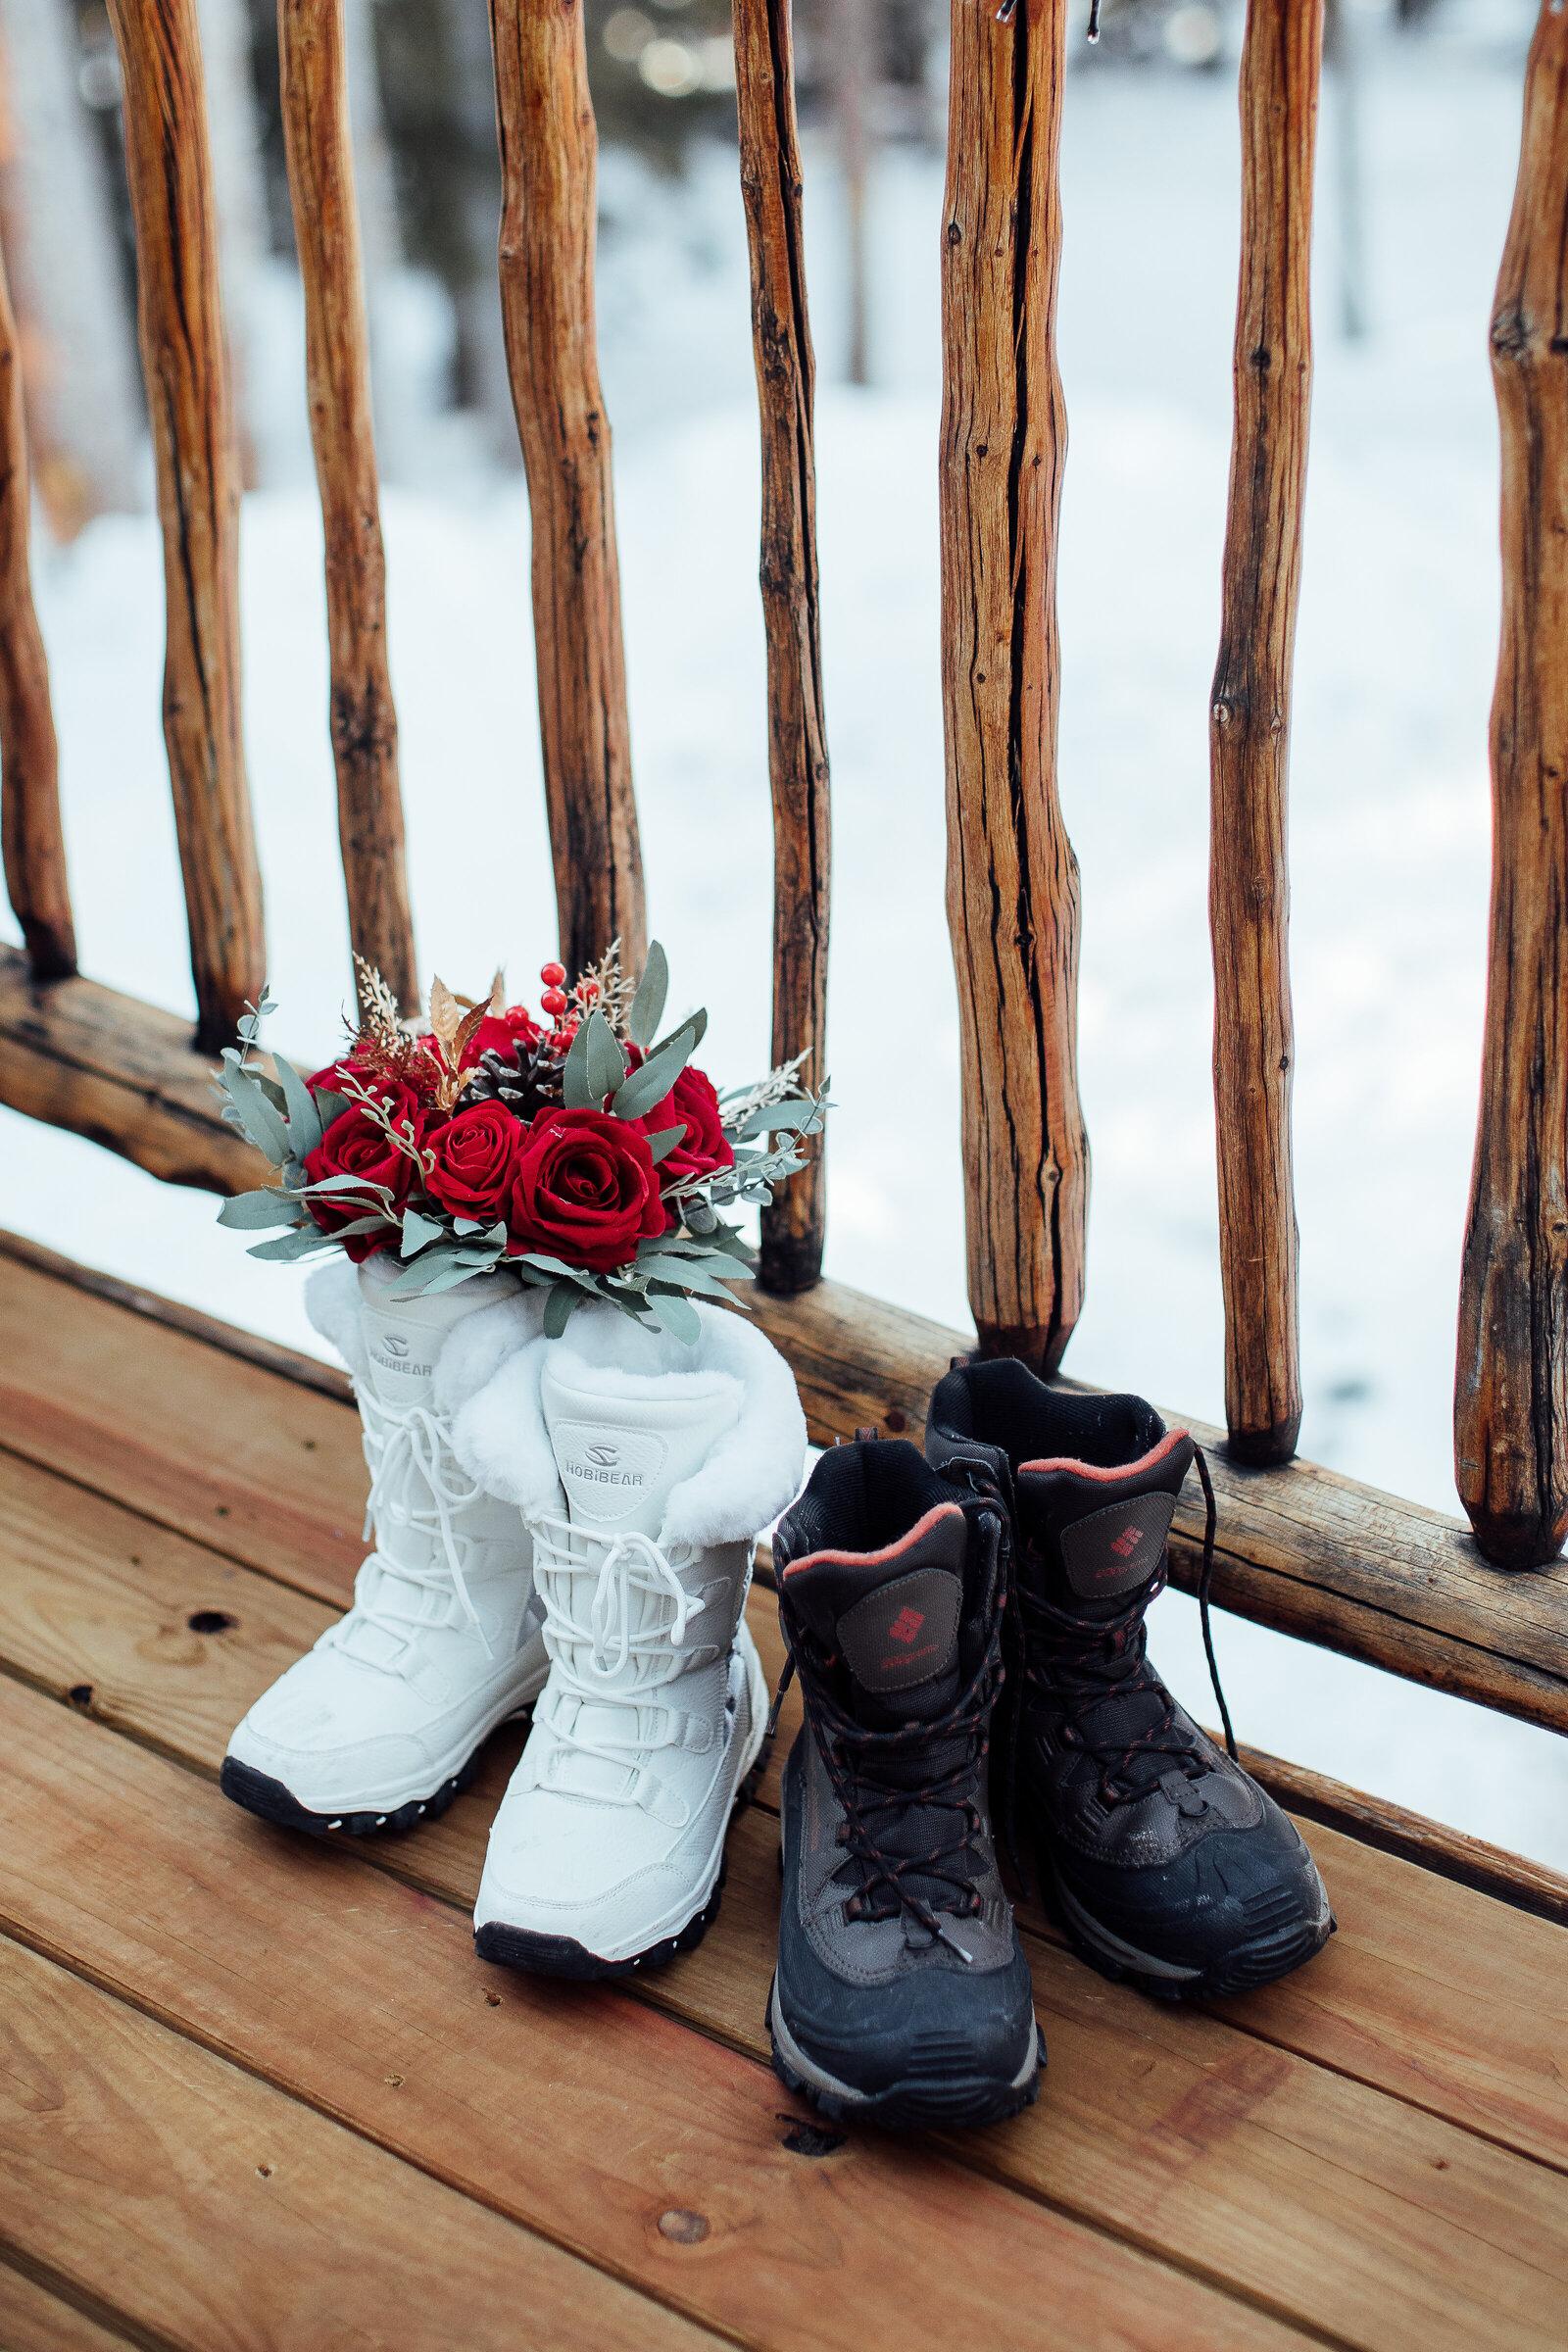 Bride and groom boots for wedding